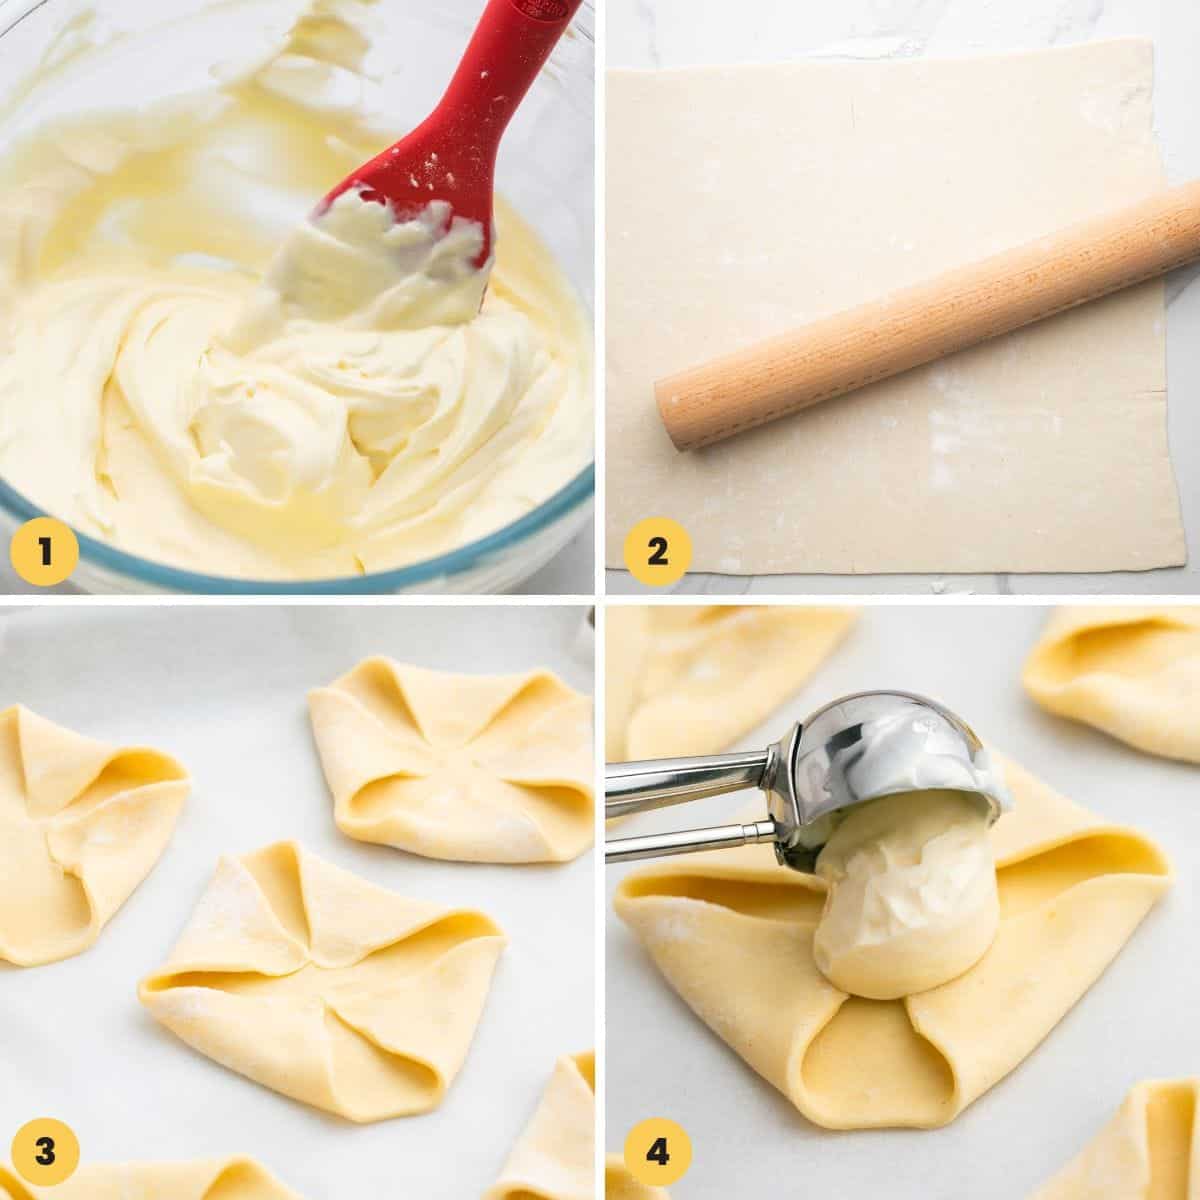 a collage of images showing how to make cream cheese filling for danish and how to roll and form the puff pastry dough before baking.